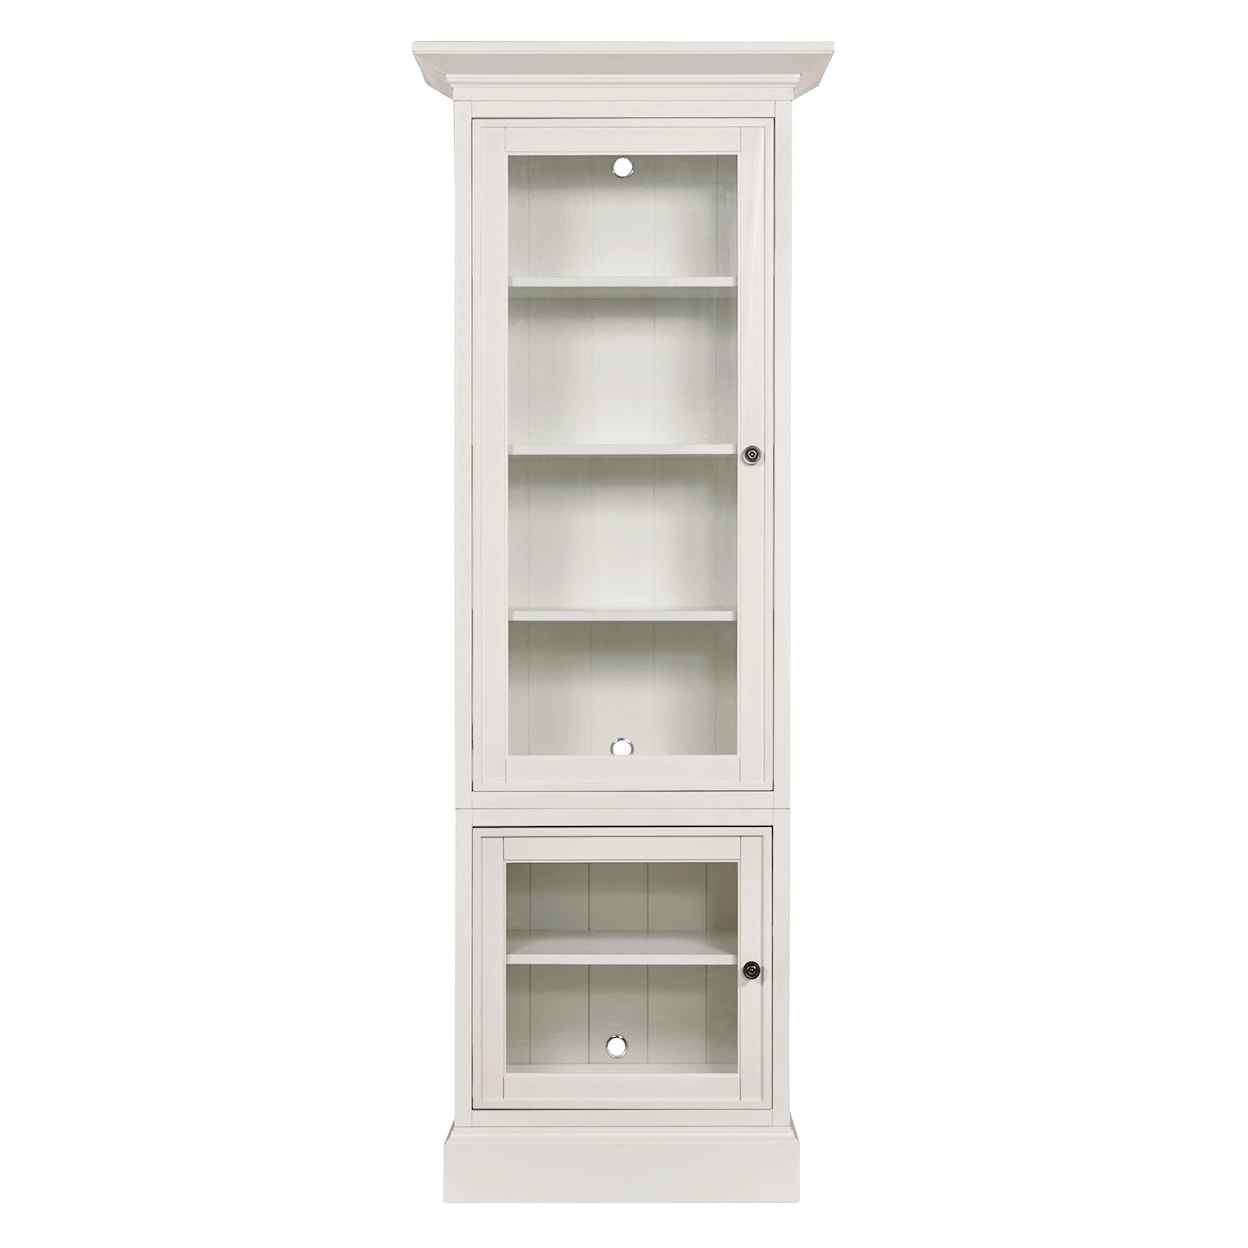 Hammary Structures Single Display Cabinet